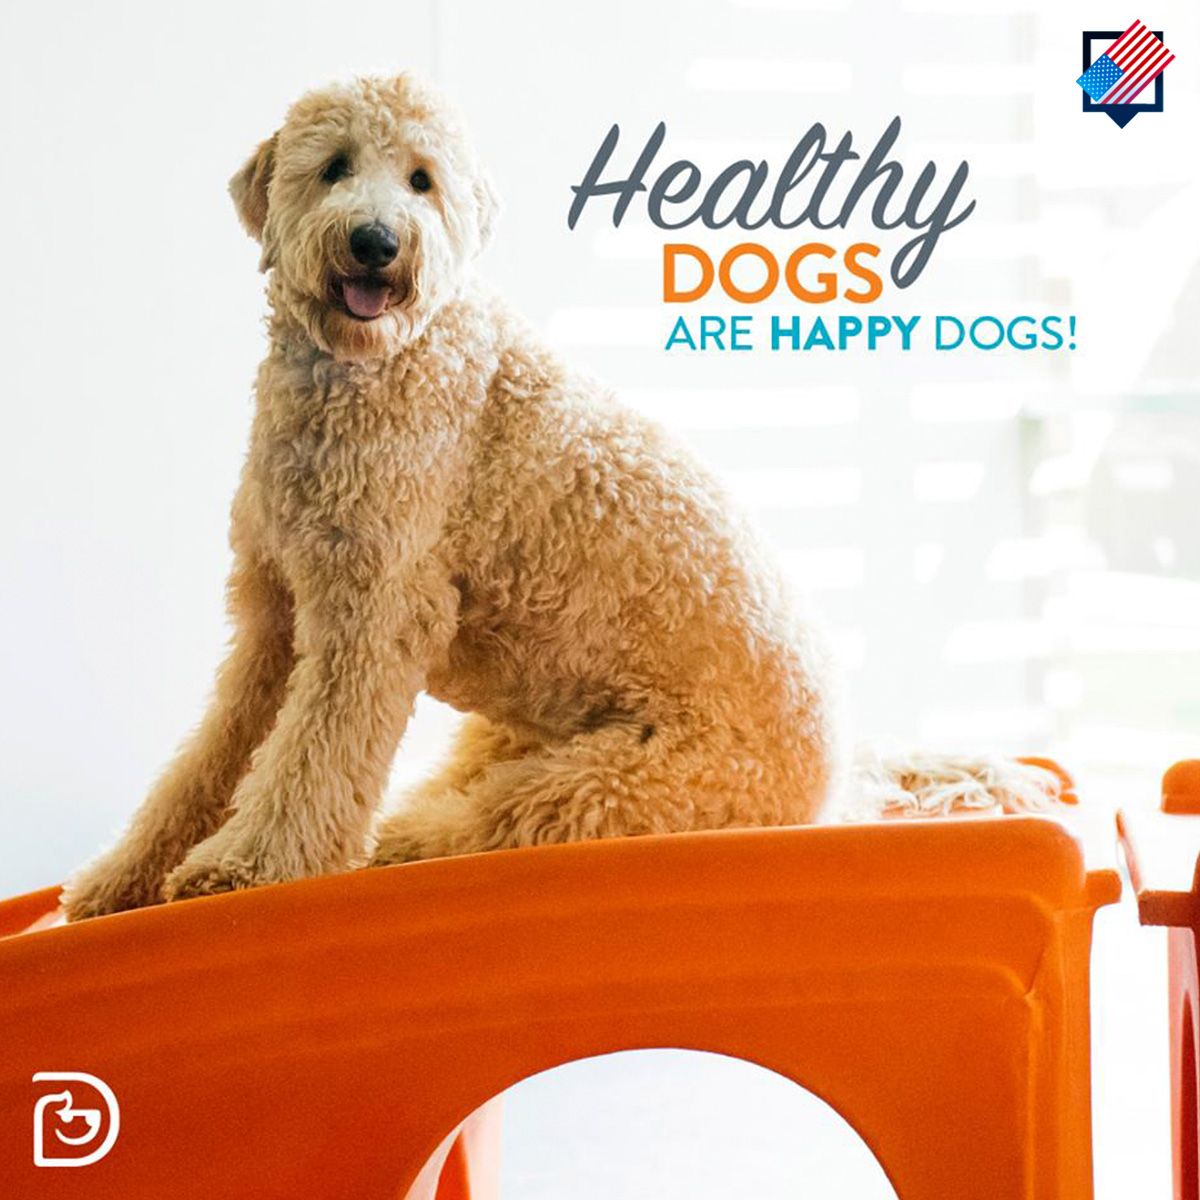 Healthy Dogs Are Happy Dogs!